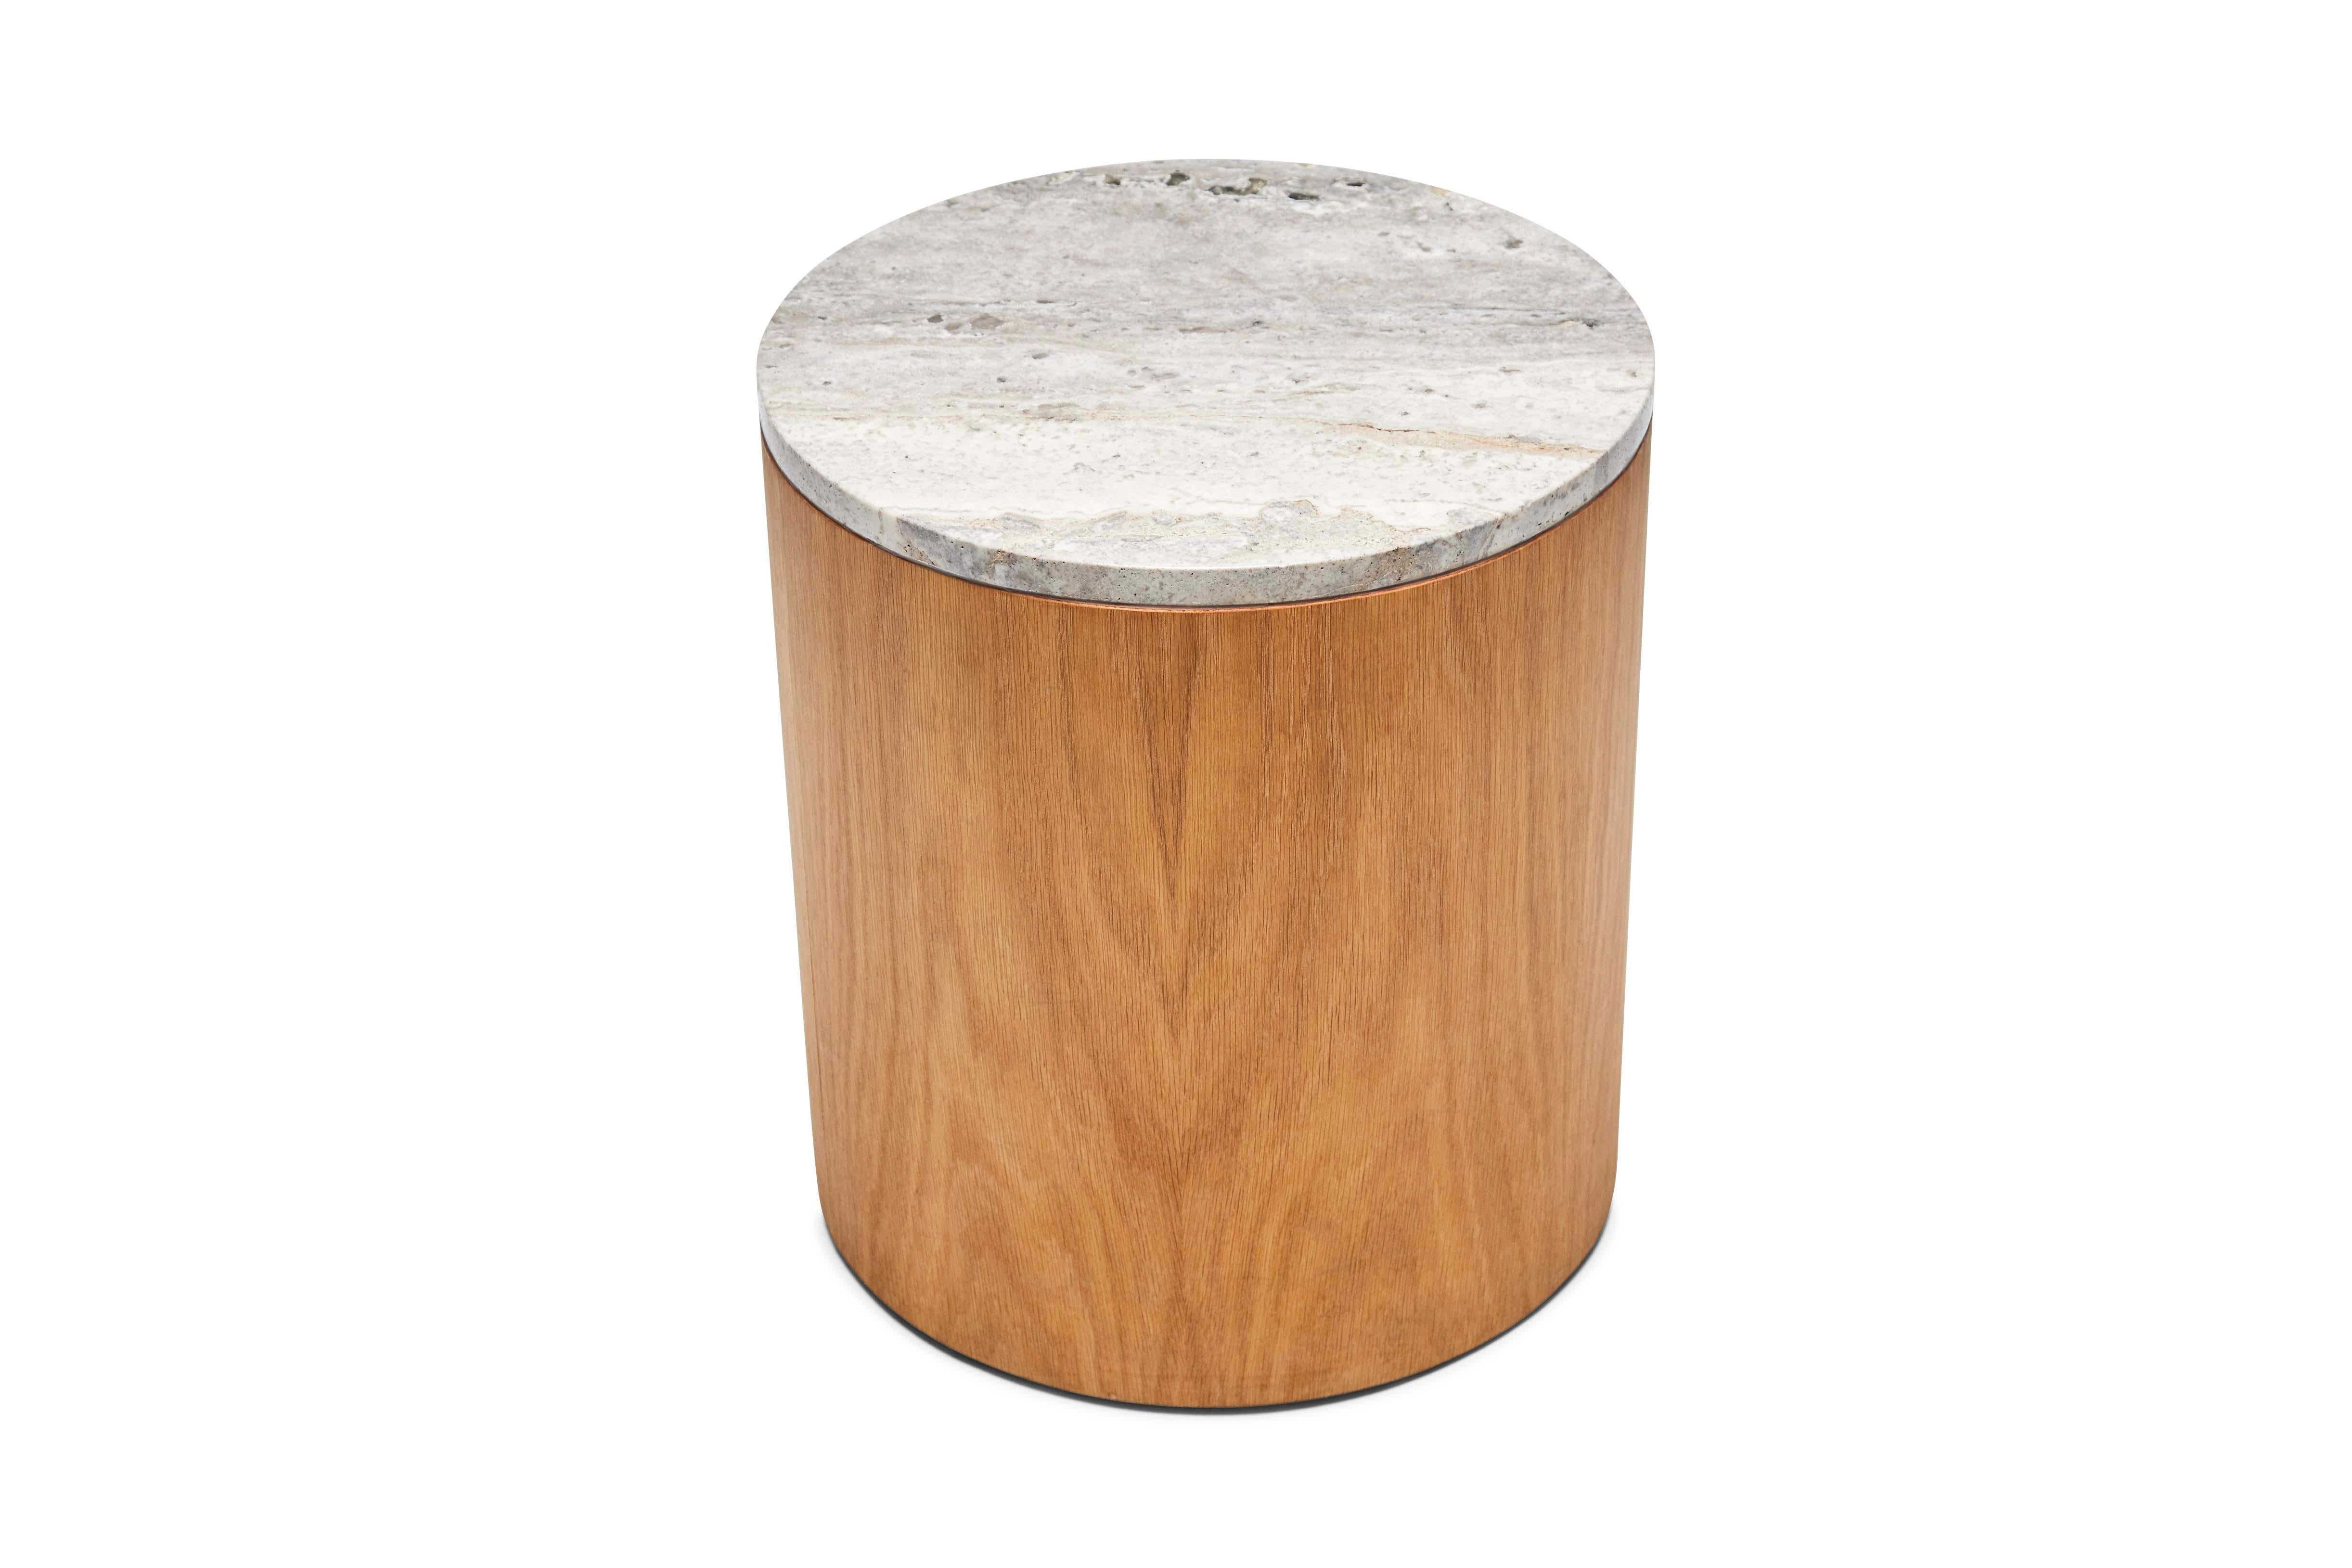 The Prospect table is a drum table which features either an American walnut or white oak exterior and a stone top. Shown here in titanium travertine and oiled oak.

The Lawson-Fenning Collection is designed and handmade in Los Angeles,